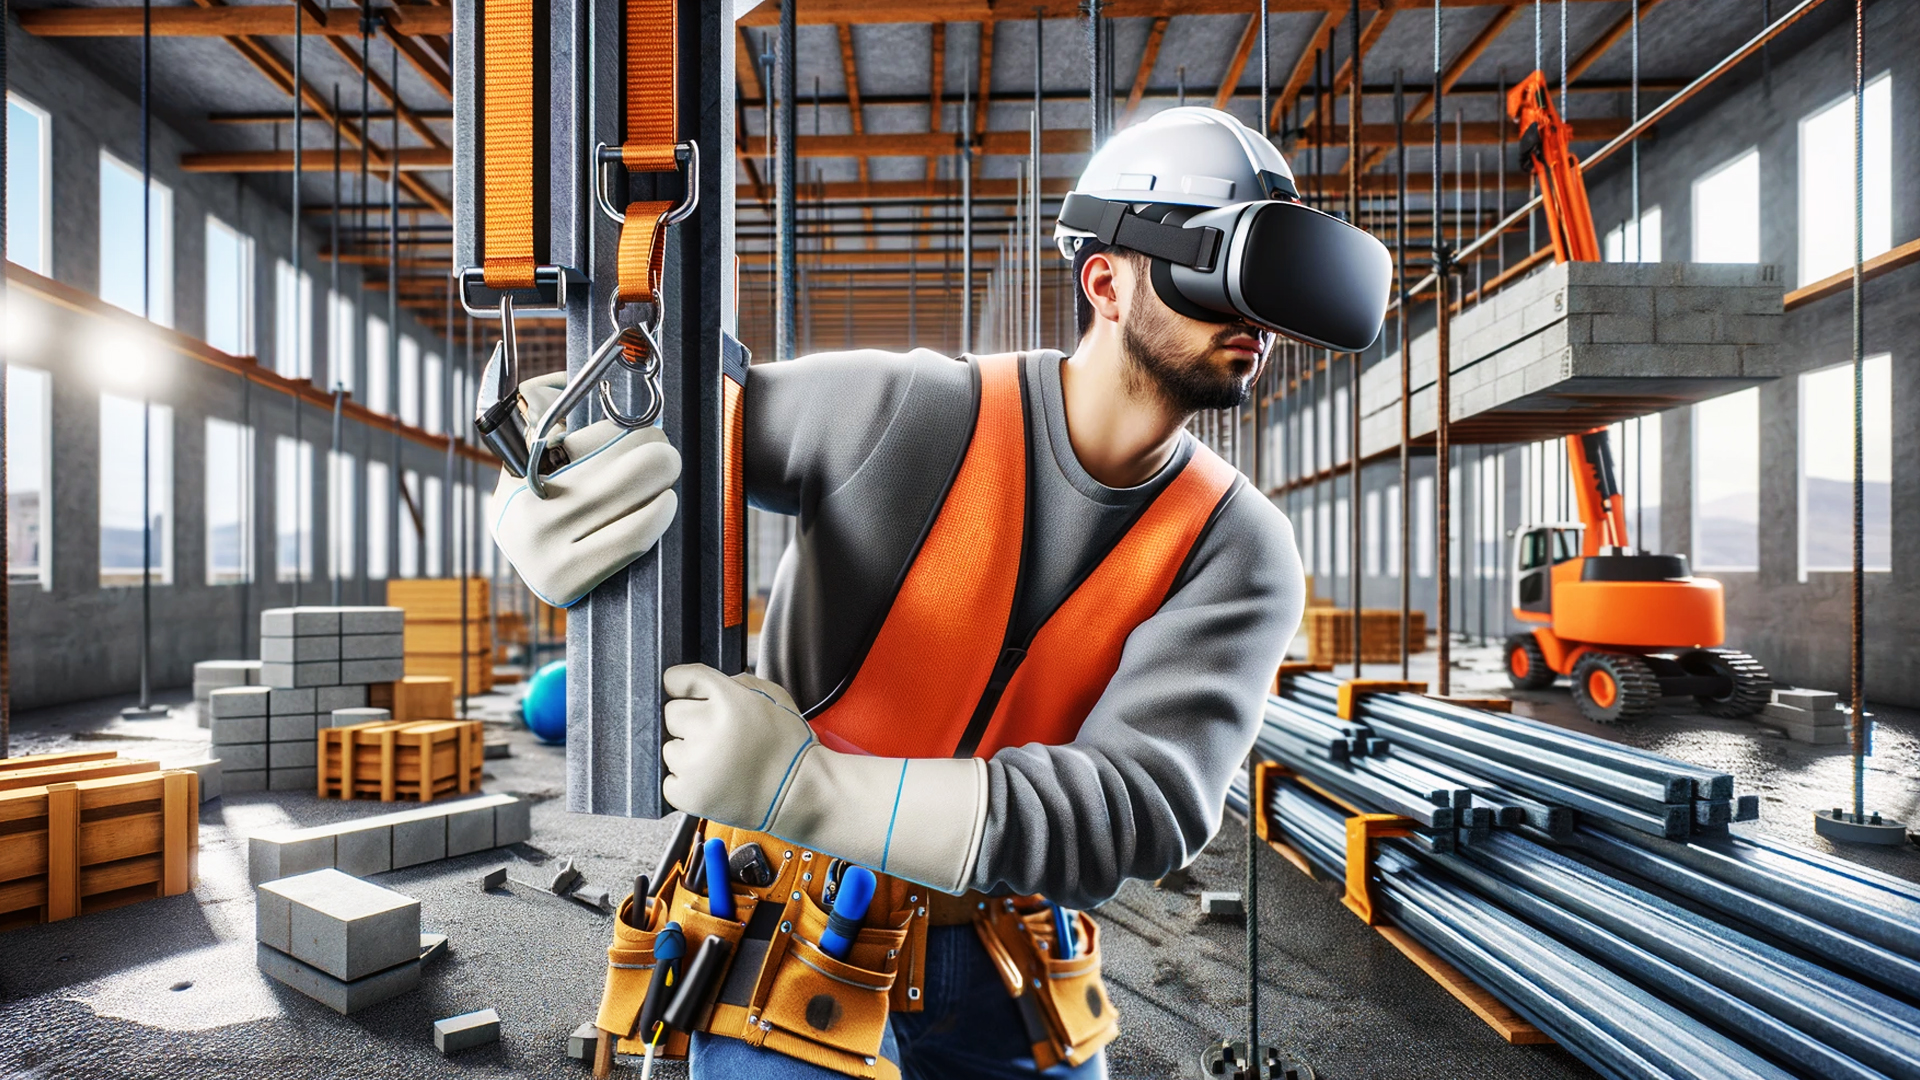 Virtual Reality South Africa’s Scaffolding Safety Training Application